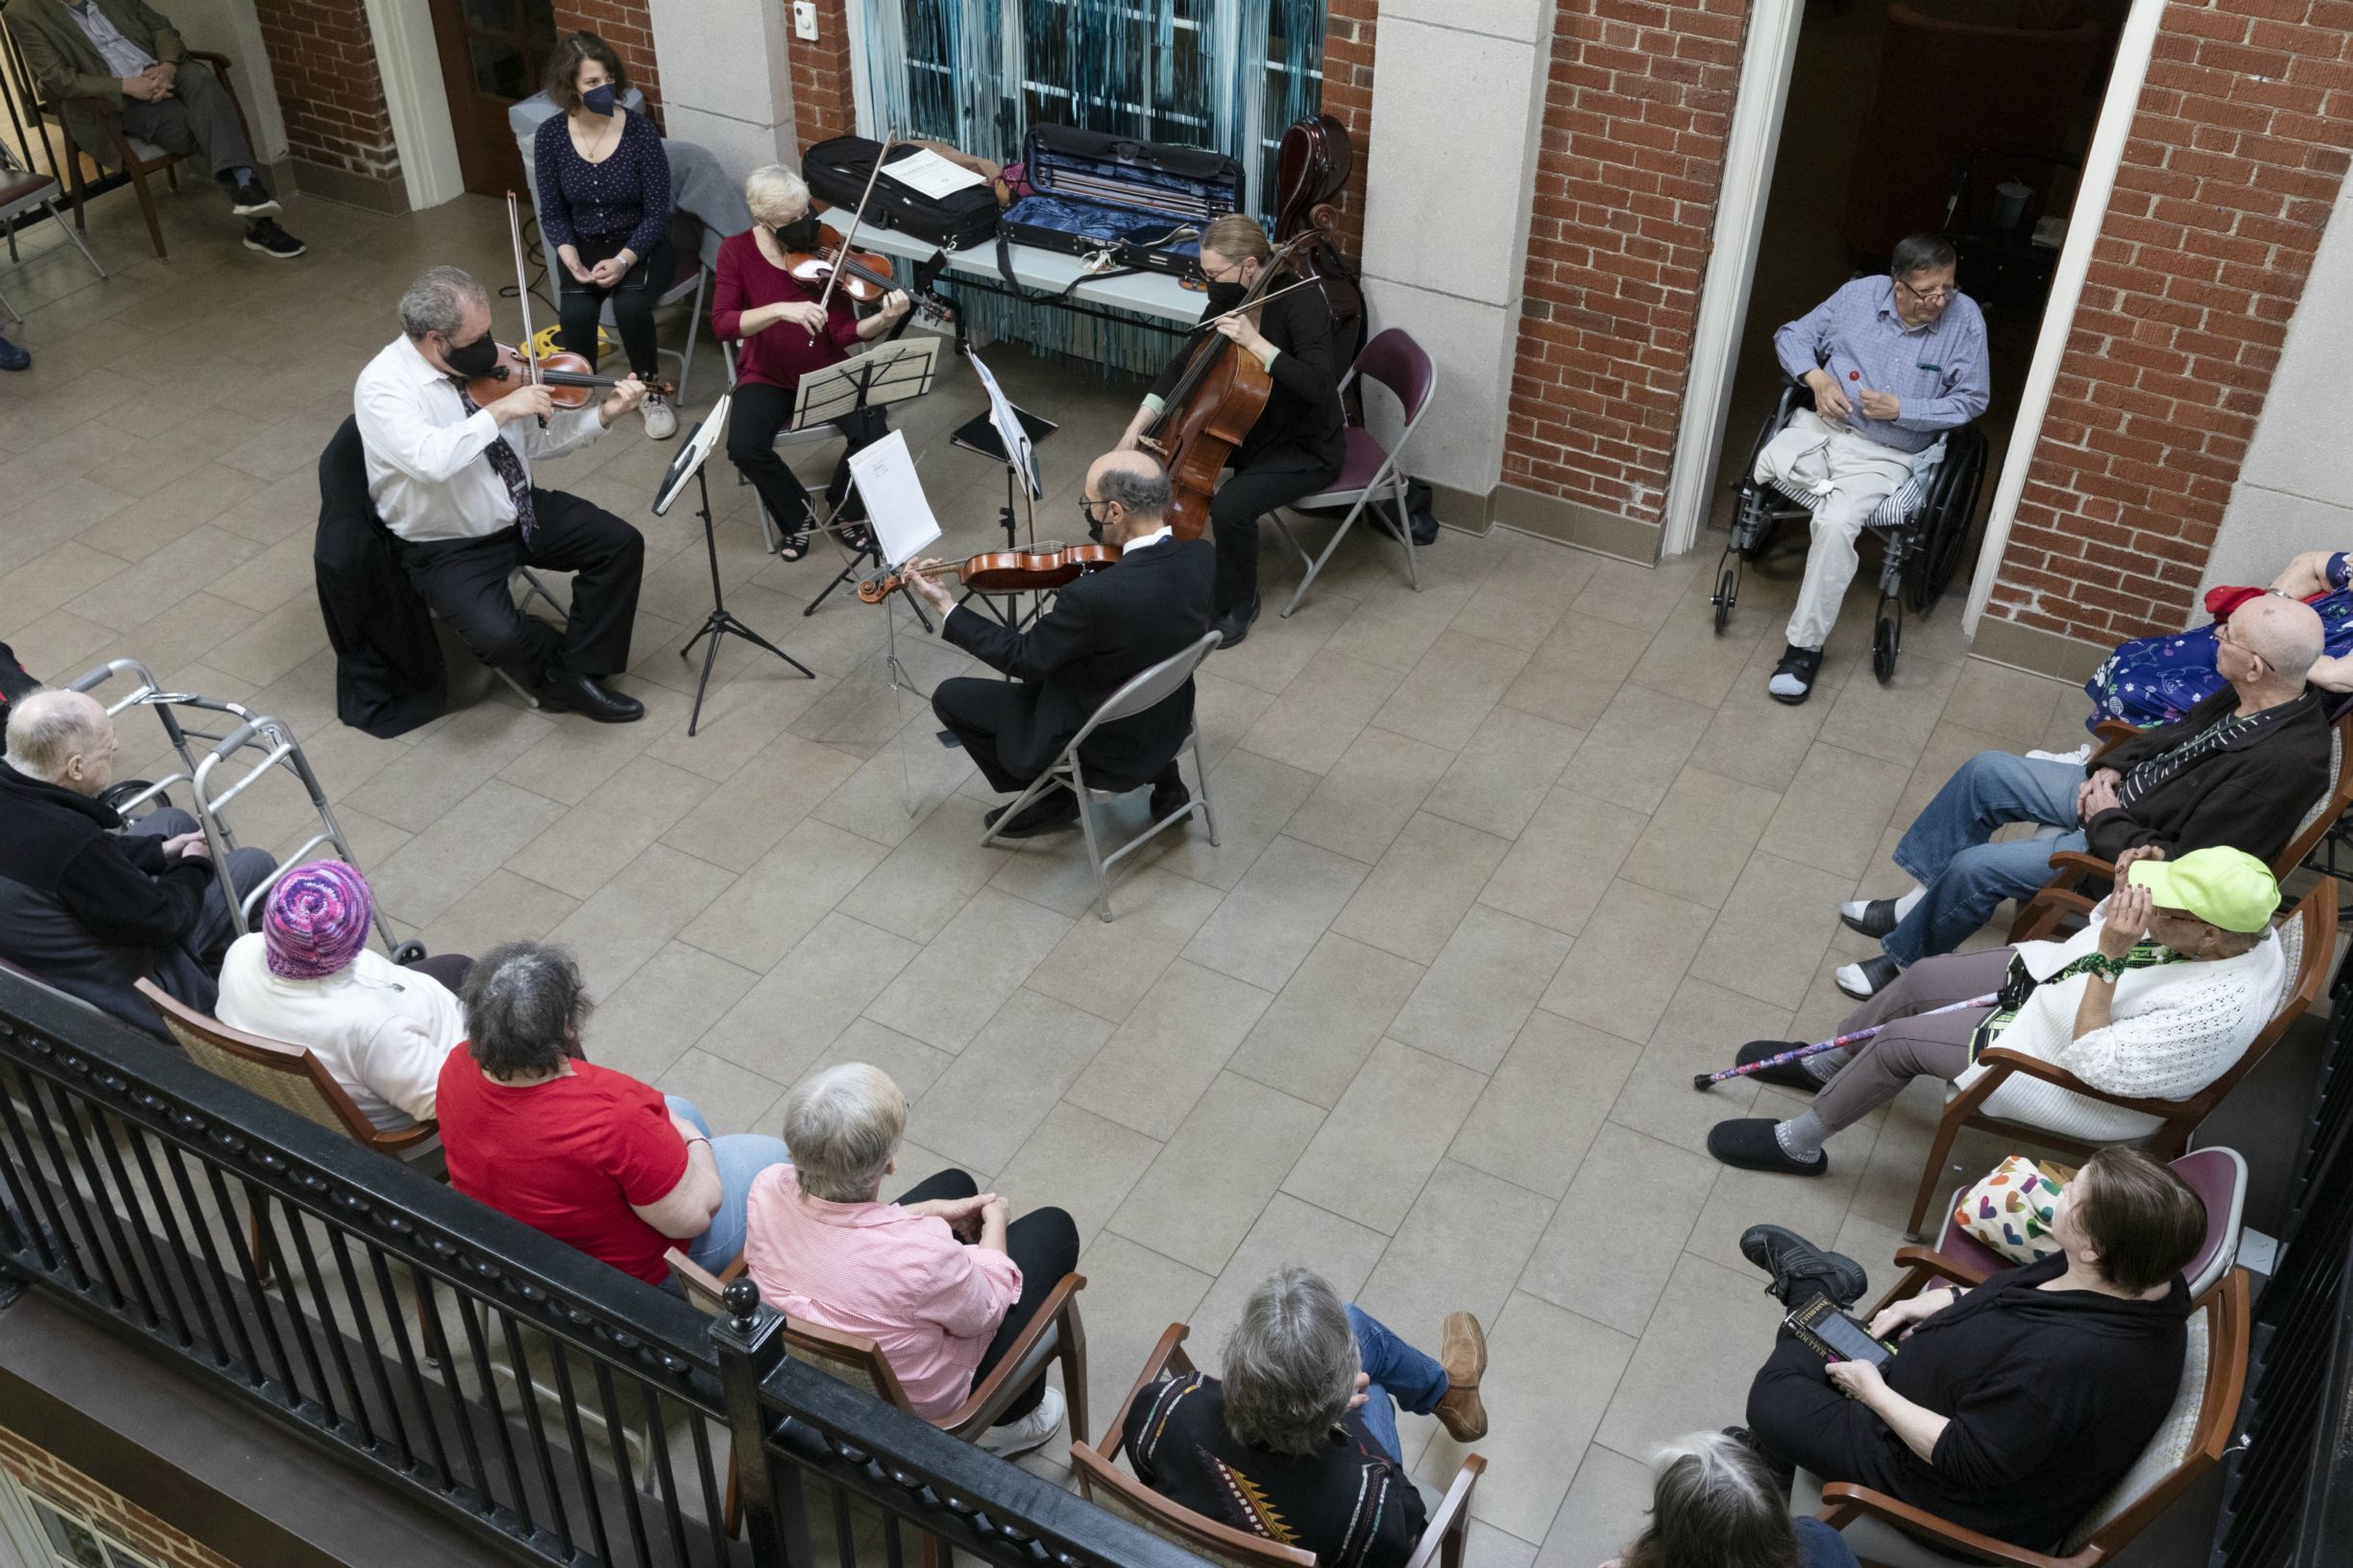 Residents at a nursing facility sit and watch Landmarks Orchestra's string quartet perform.